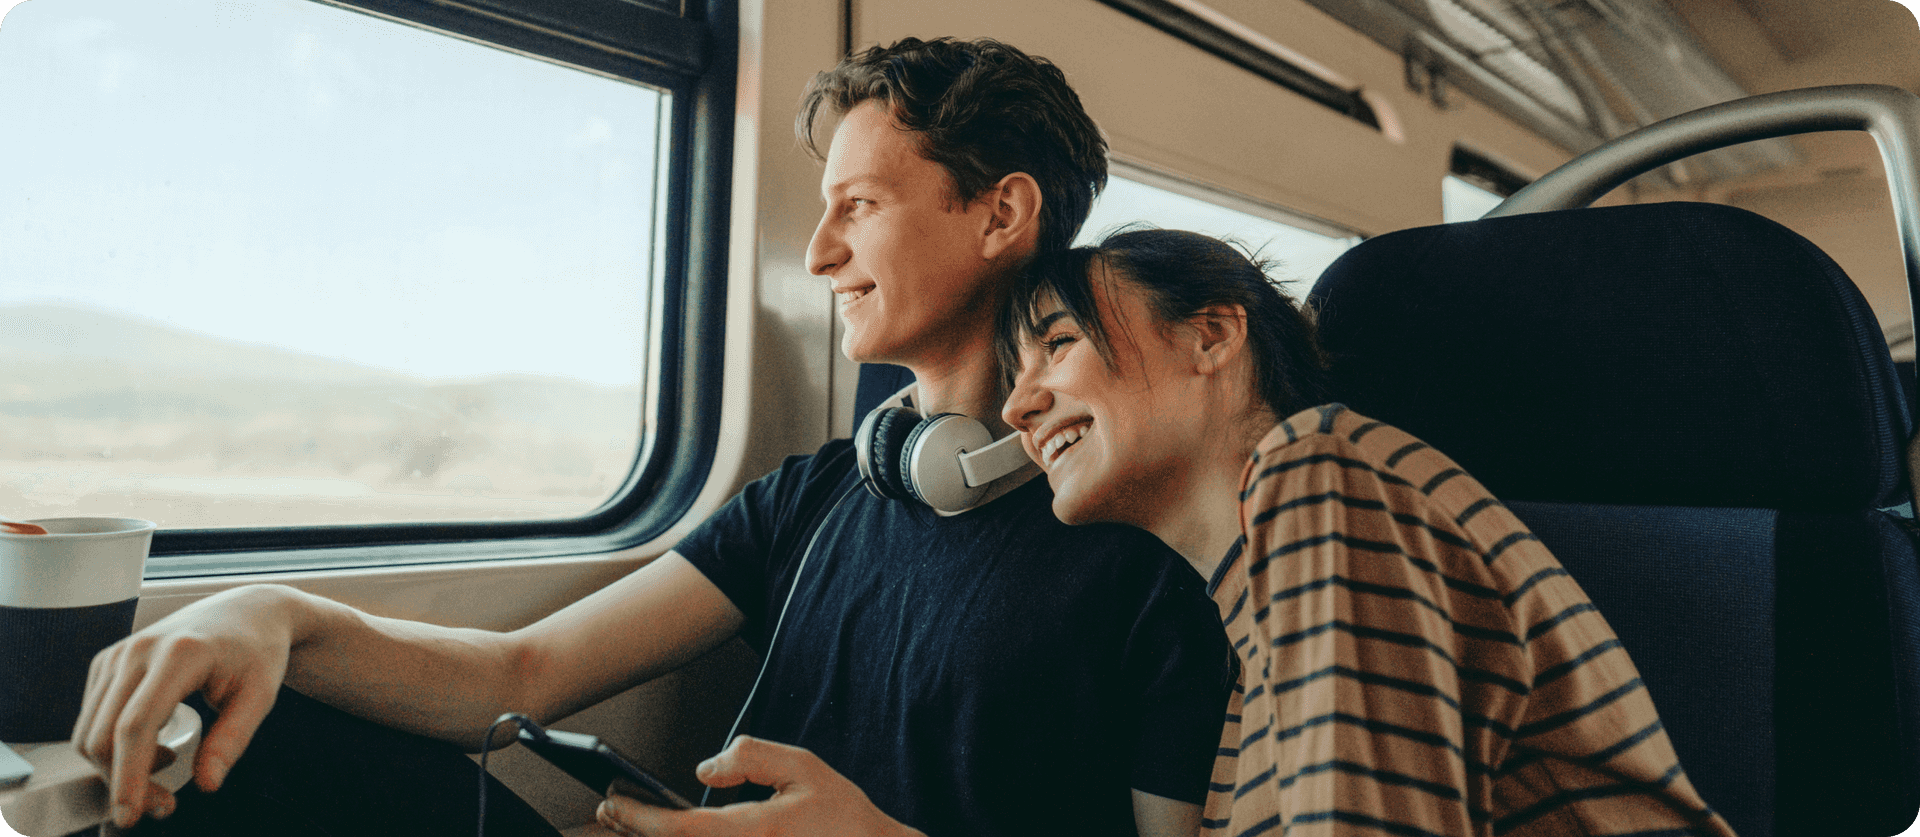 A man and woman sitting on a train smiling and staring out the window.